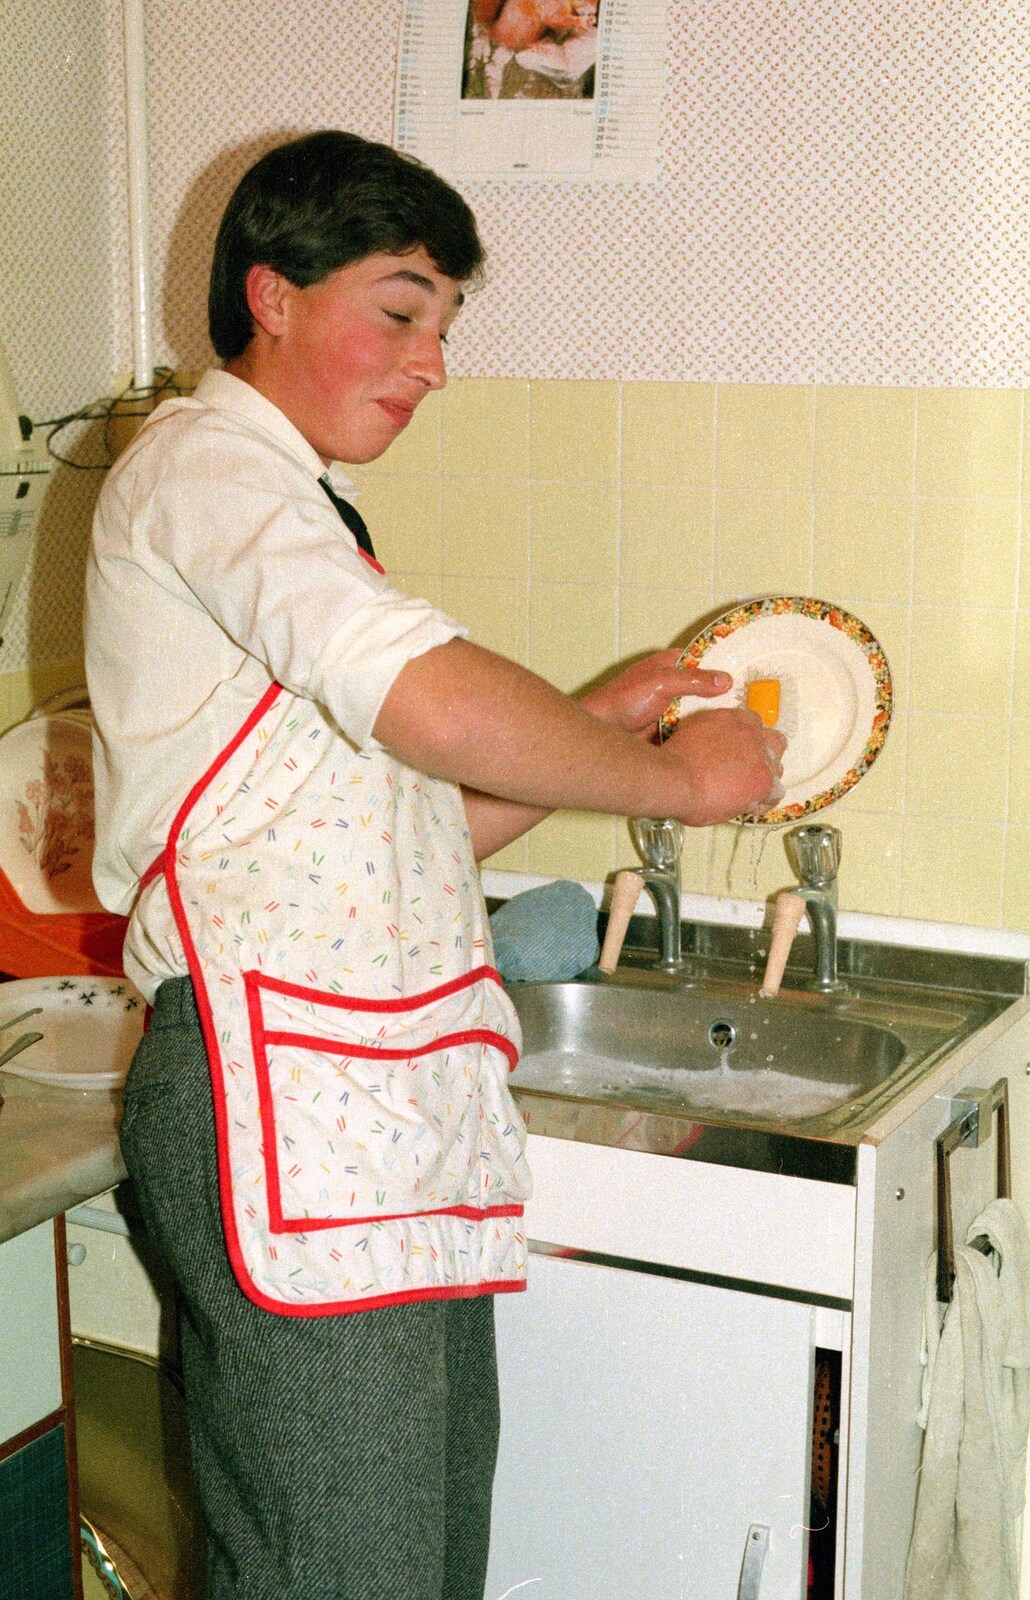 A spot of washing up occurs from A CB Radio Party, Stem Lane, New Milton - 15th July 1986